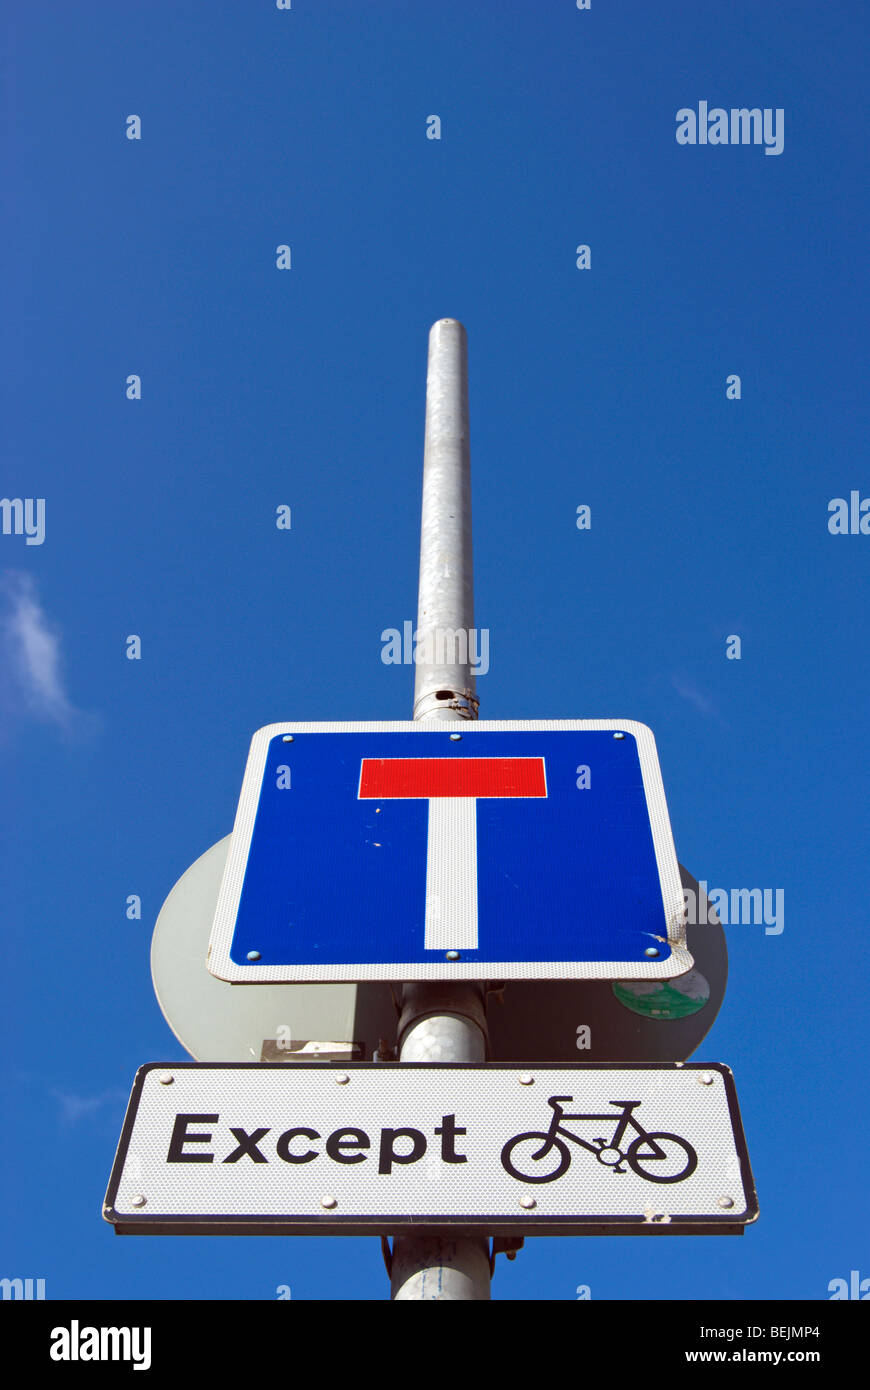 british road sign indicating a no through road, except for cyclists Stock Photo